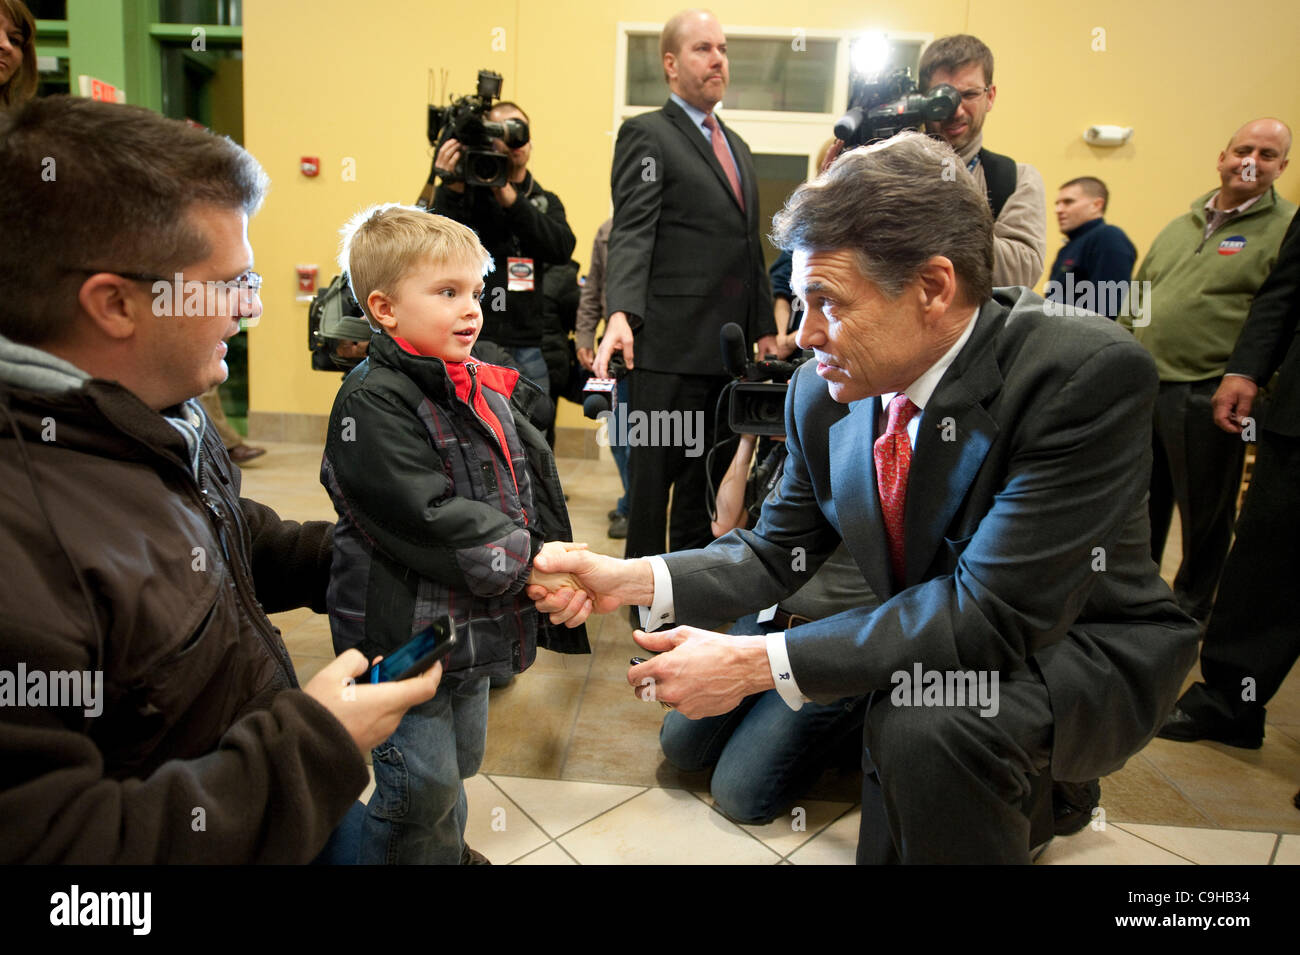 Republican presidential nominee candidate Rick Perry greets a young boy prior to speaking at a caucus event in Iowa. Stock Photo